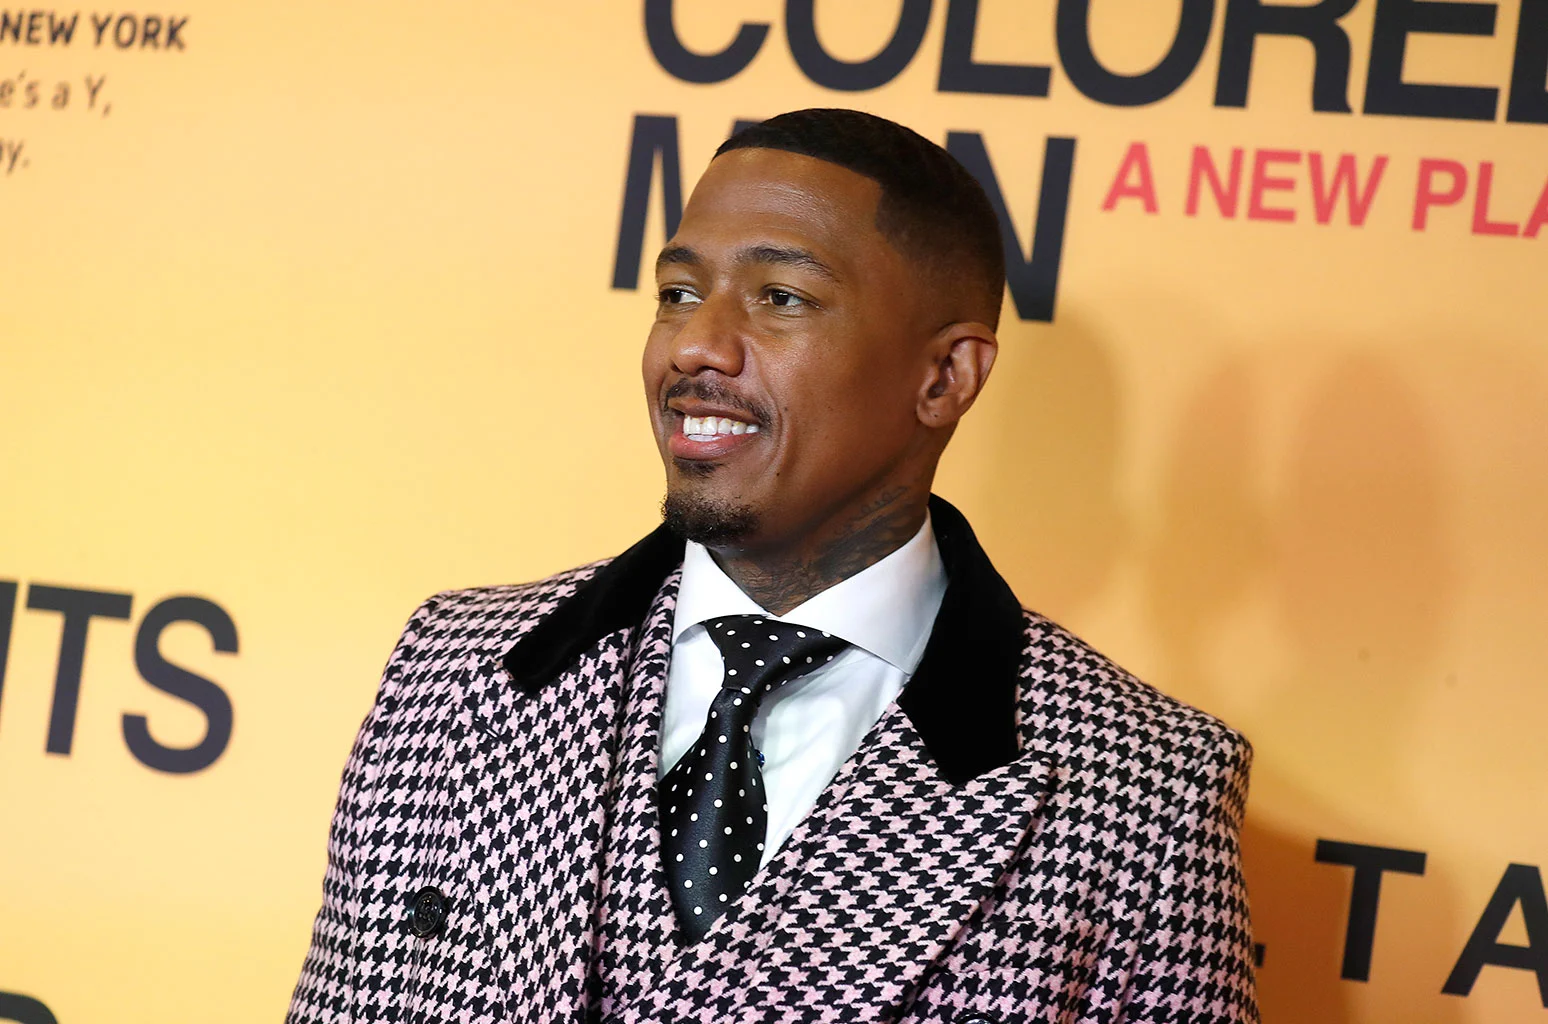 nick-cannon-has-a-9th-child-on-the-way-makes-fun-of-himself-in-advertisement